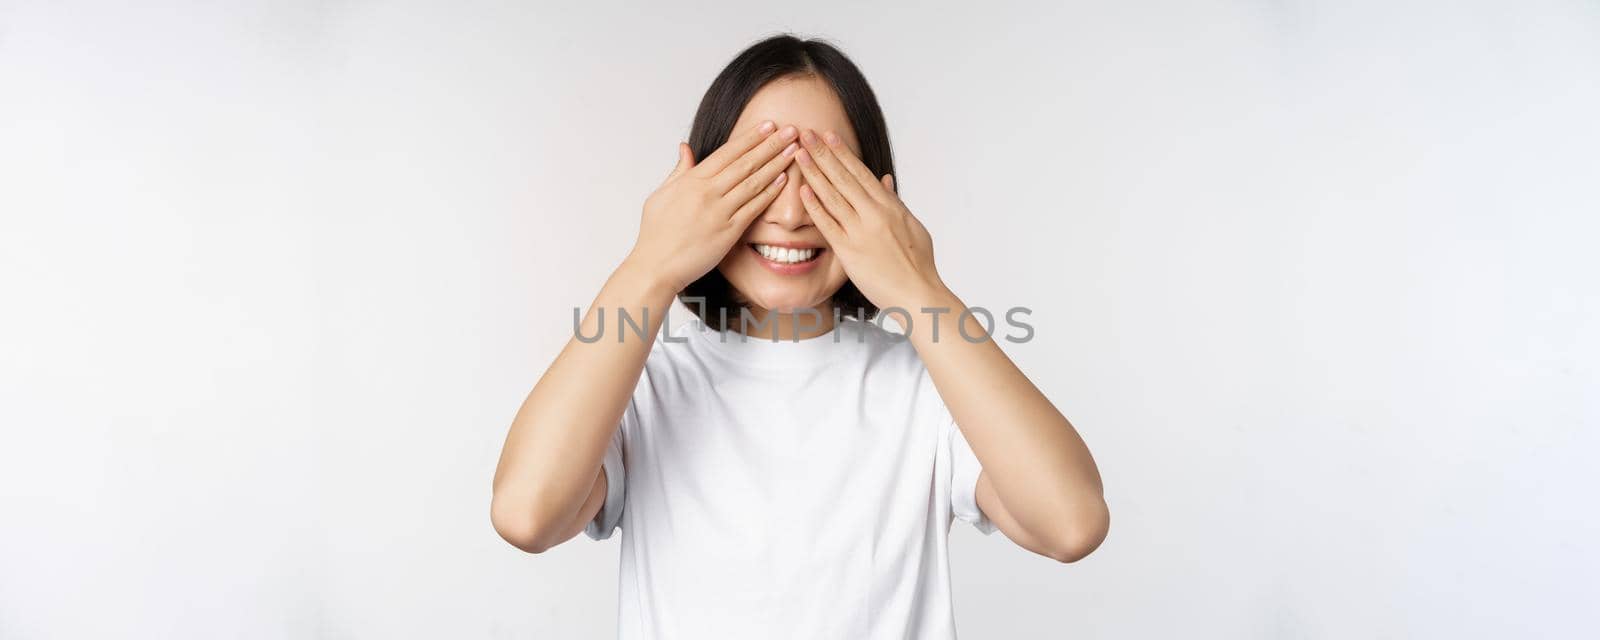 Portrait of asian woman covering eyes, waiting for surprise blindfolded, smiling happy, anticipating, standing against white background.